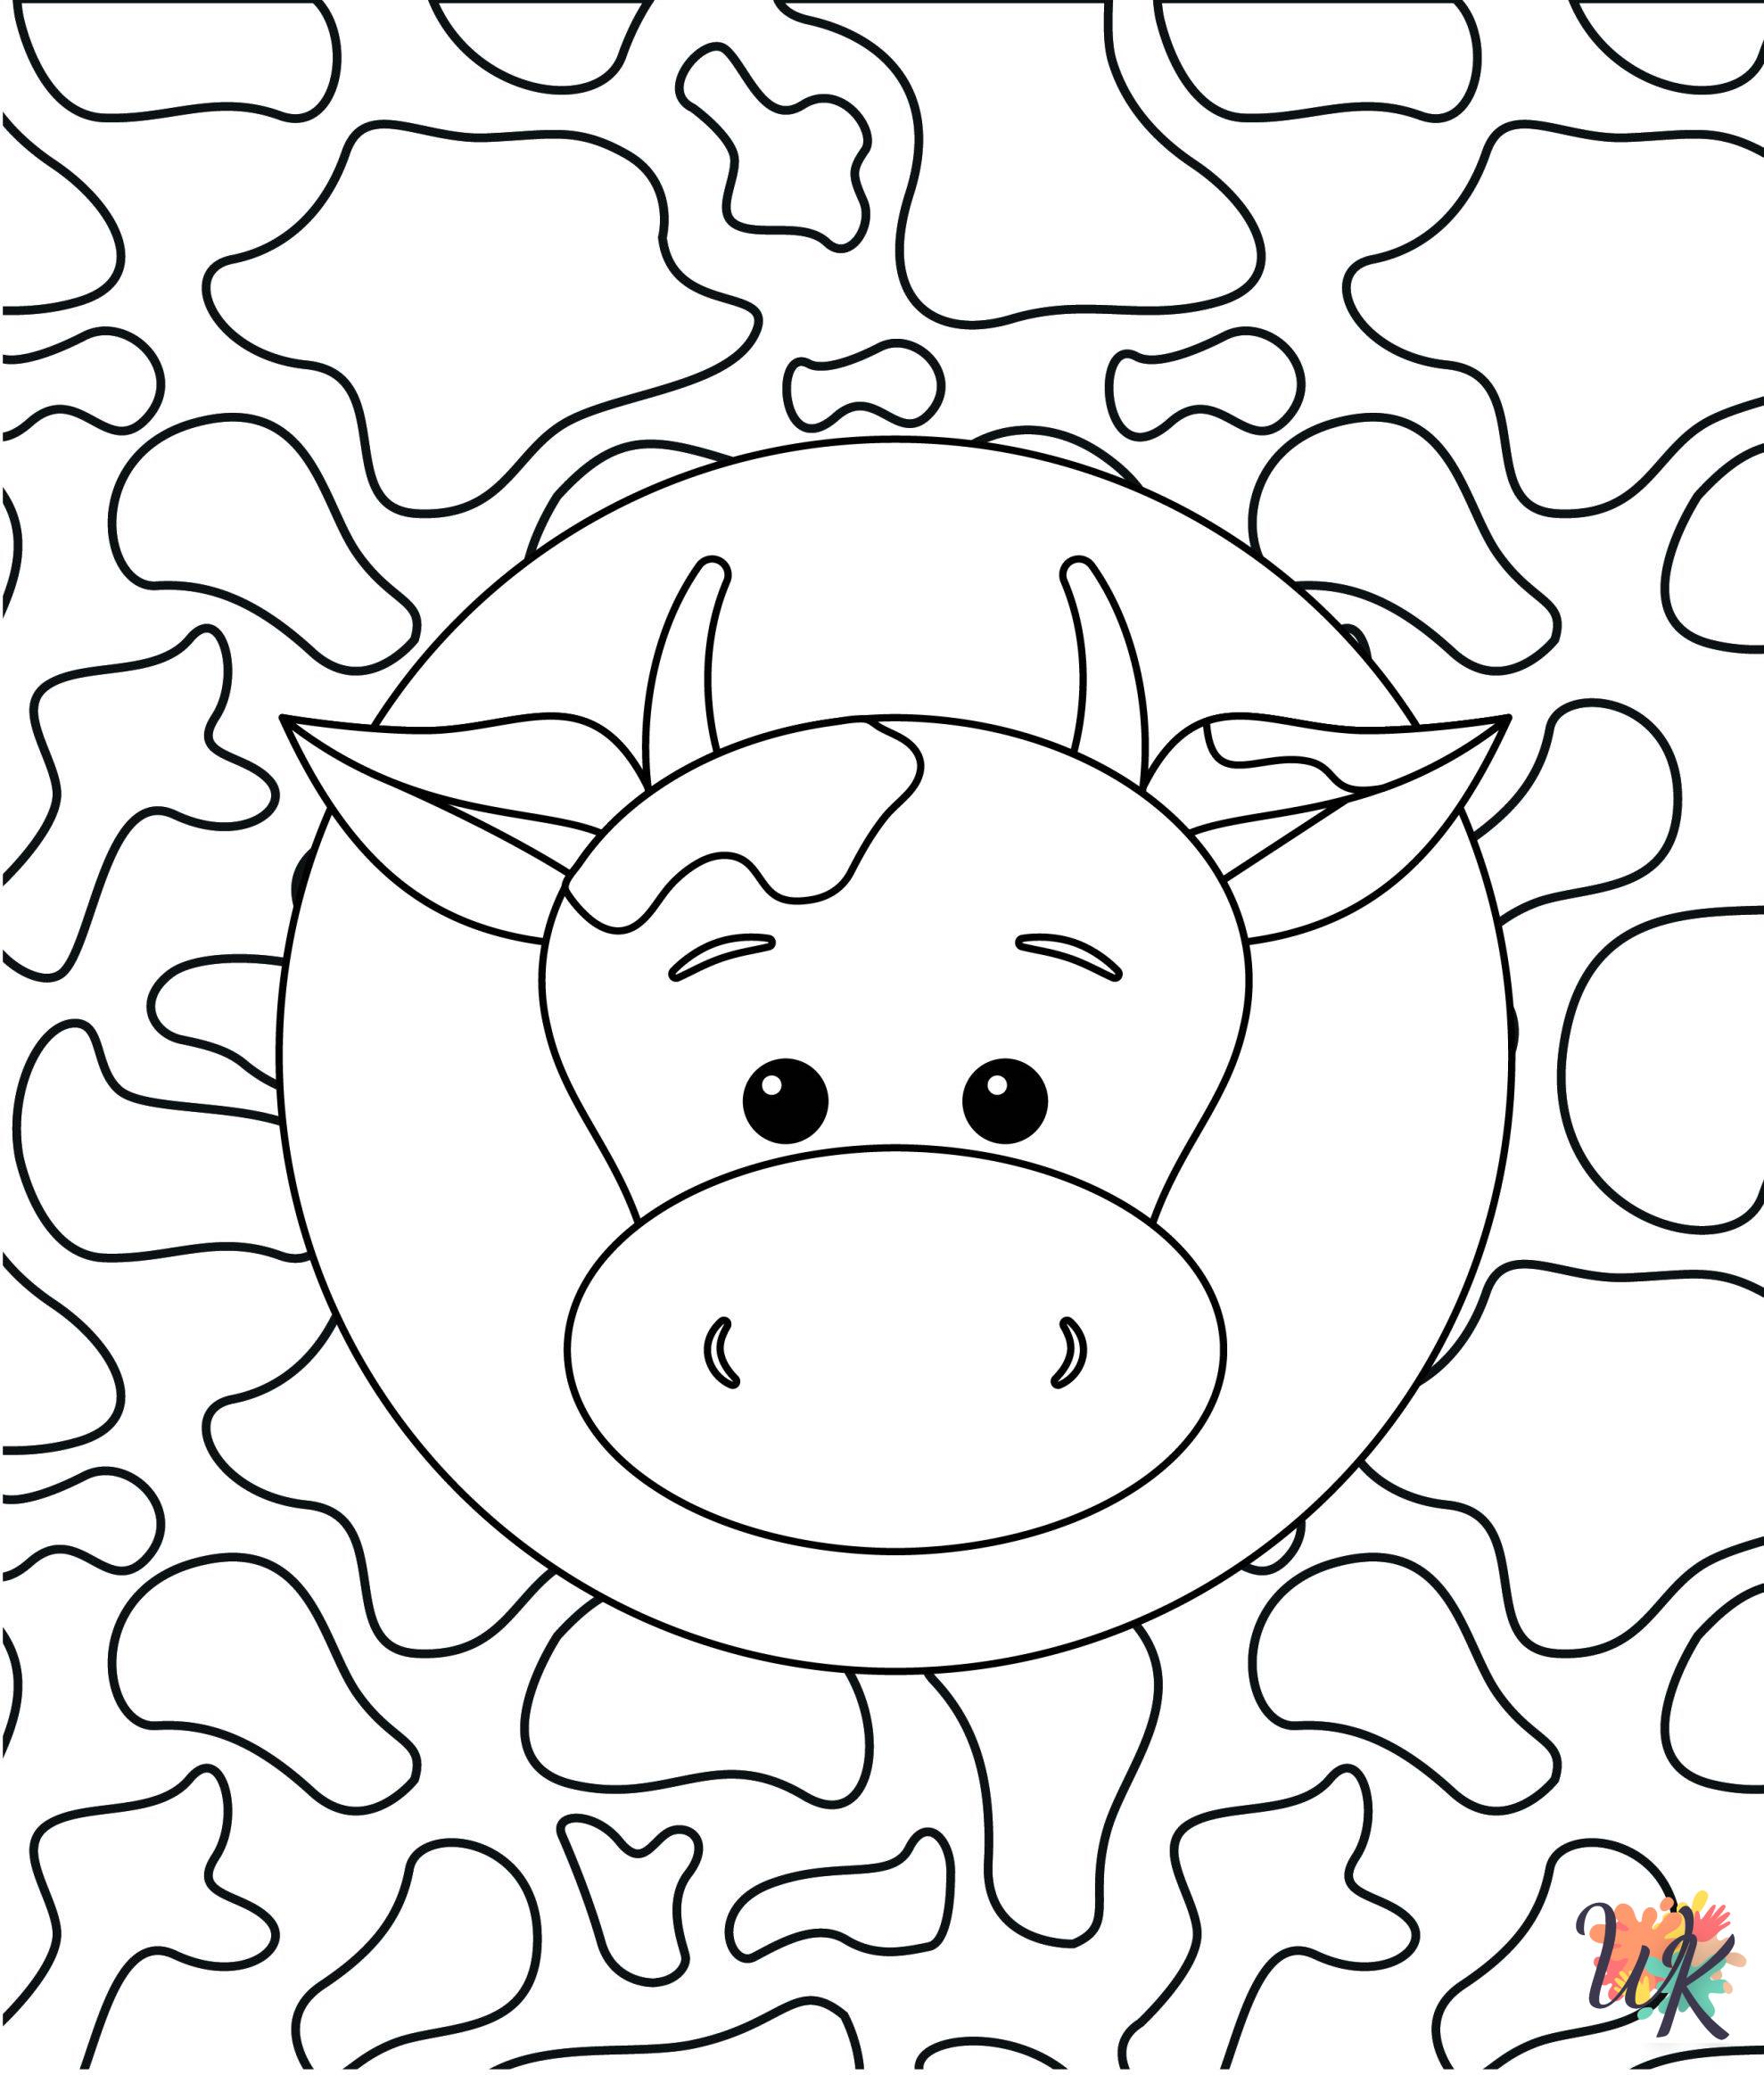 Cow coloring book pages